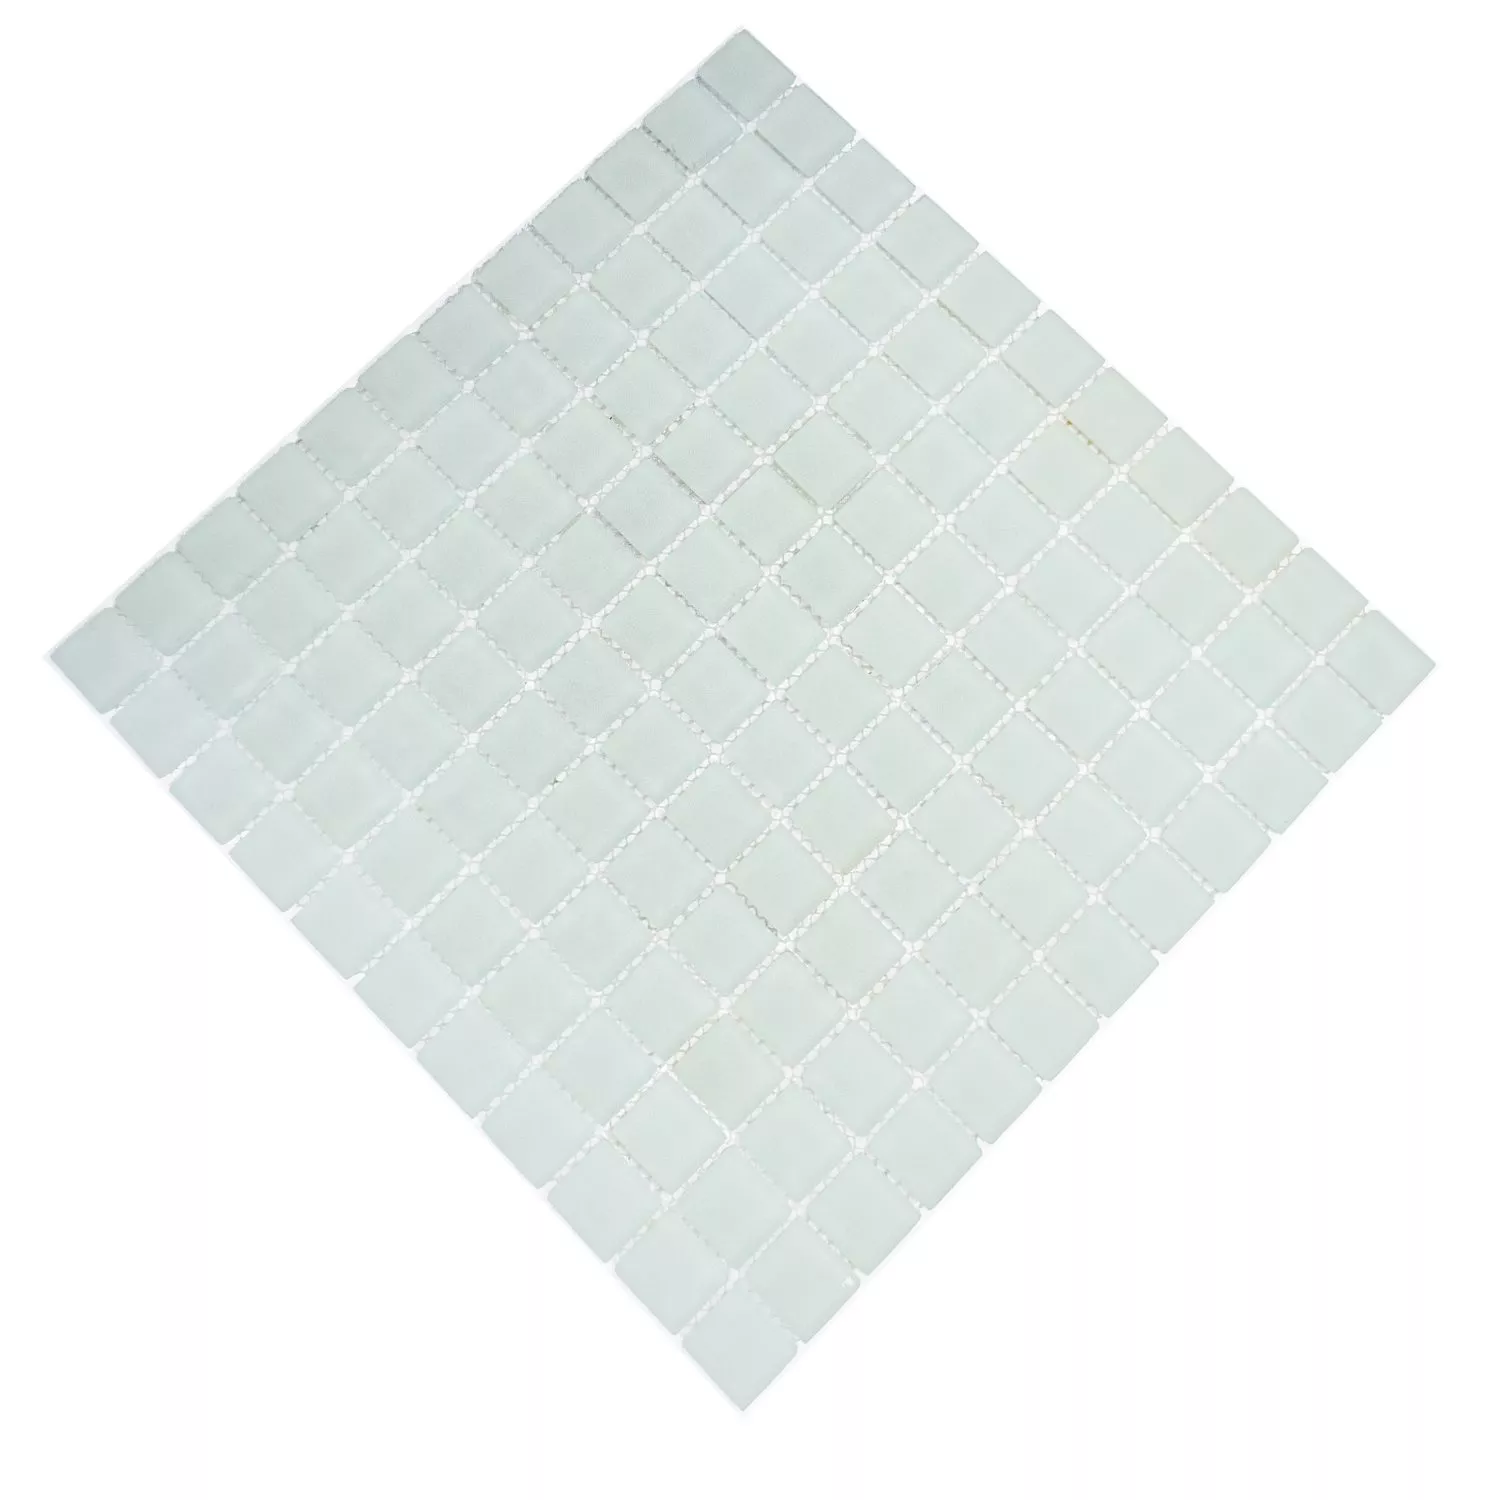 Sample Mosaic Tiles Glass White Mat Frosted